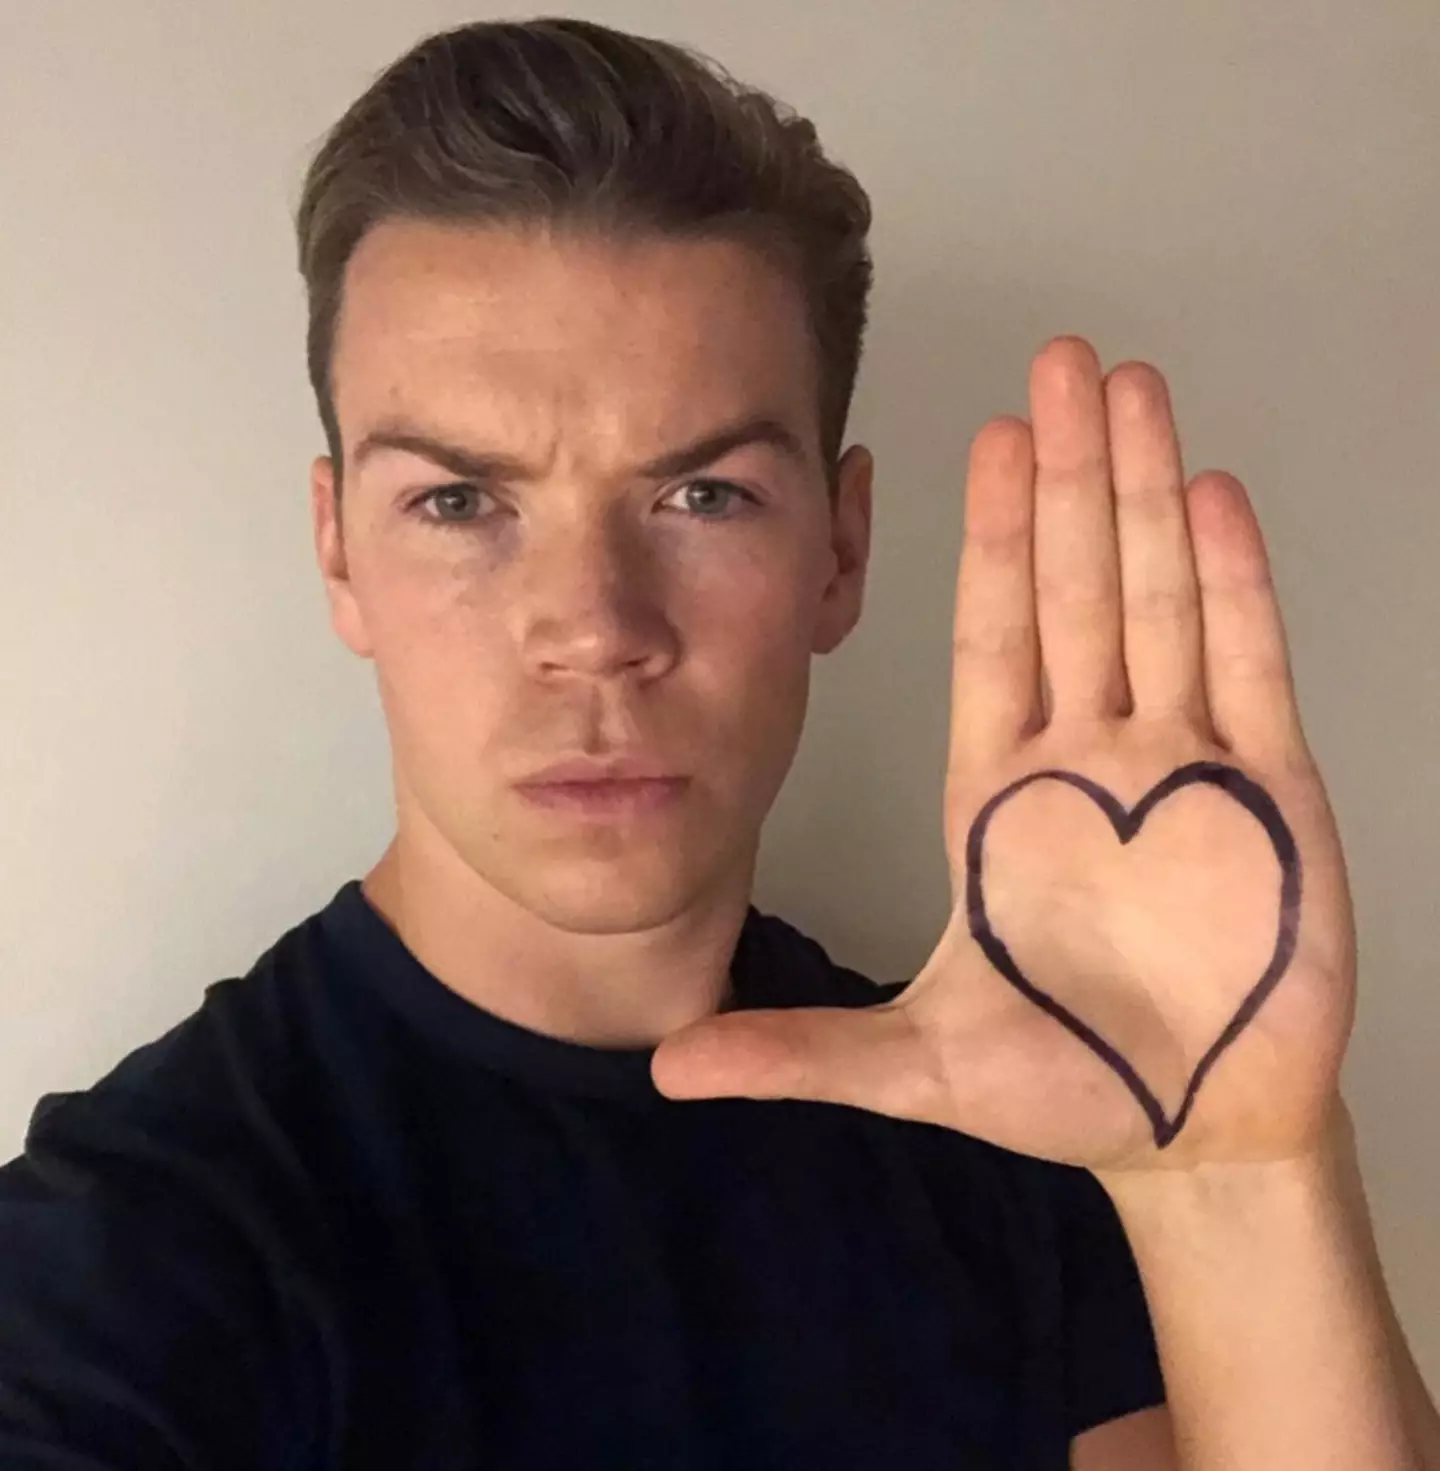 The We're the Millers actor has opened up on what it's like to have 'dyspraxia' and the misconceptions people have around developmental co-ordination disorder (DCD).